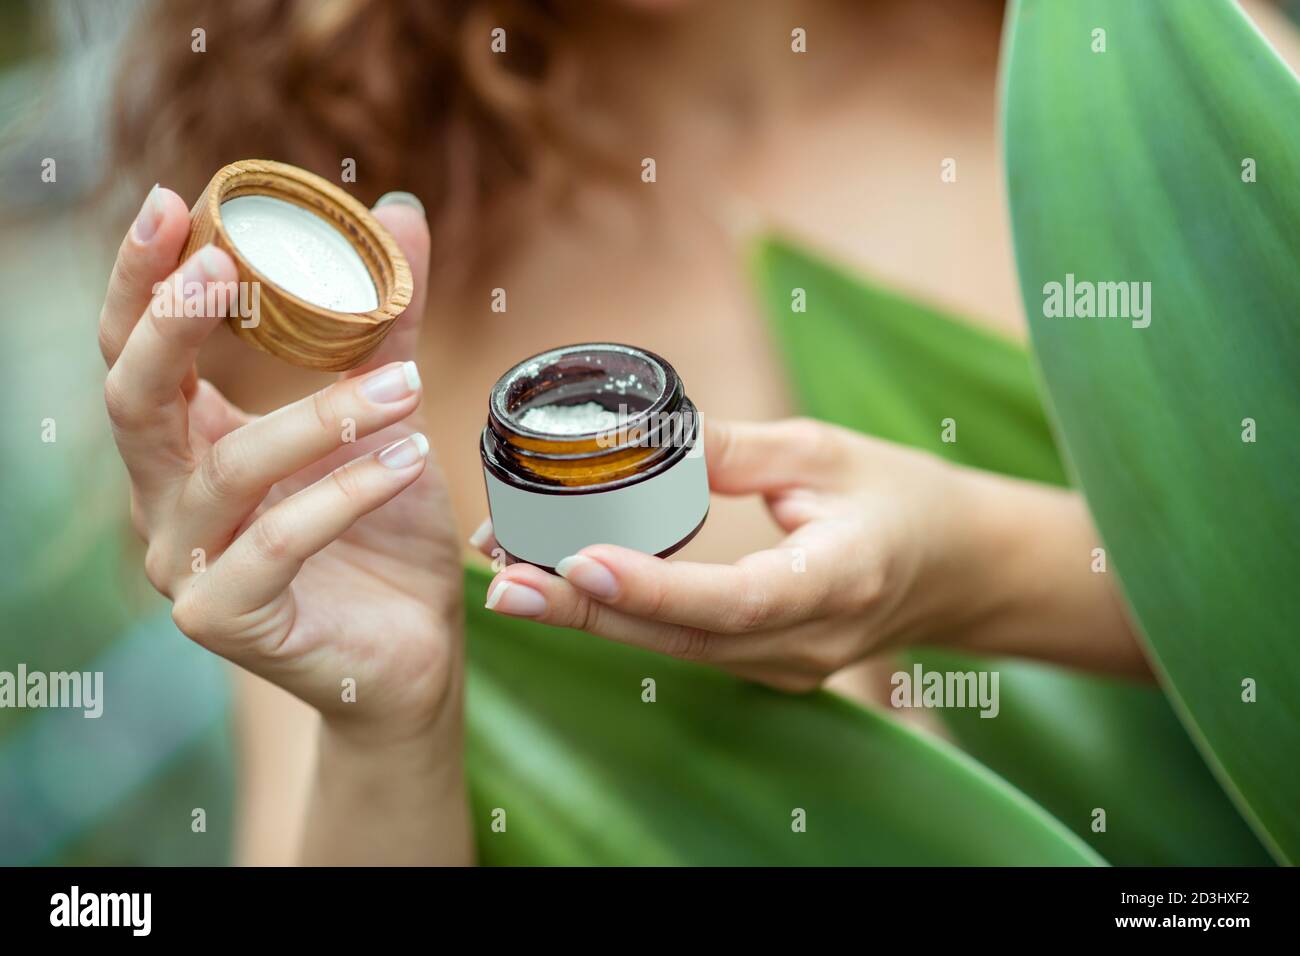 Close uo pf womans hands holding a jar of cream Stock Photo